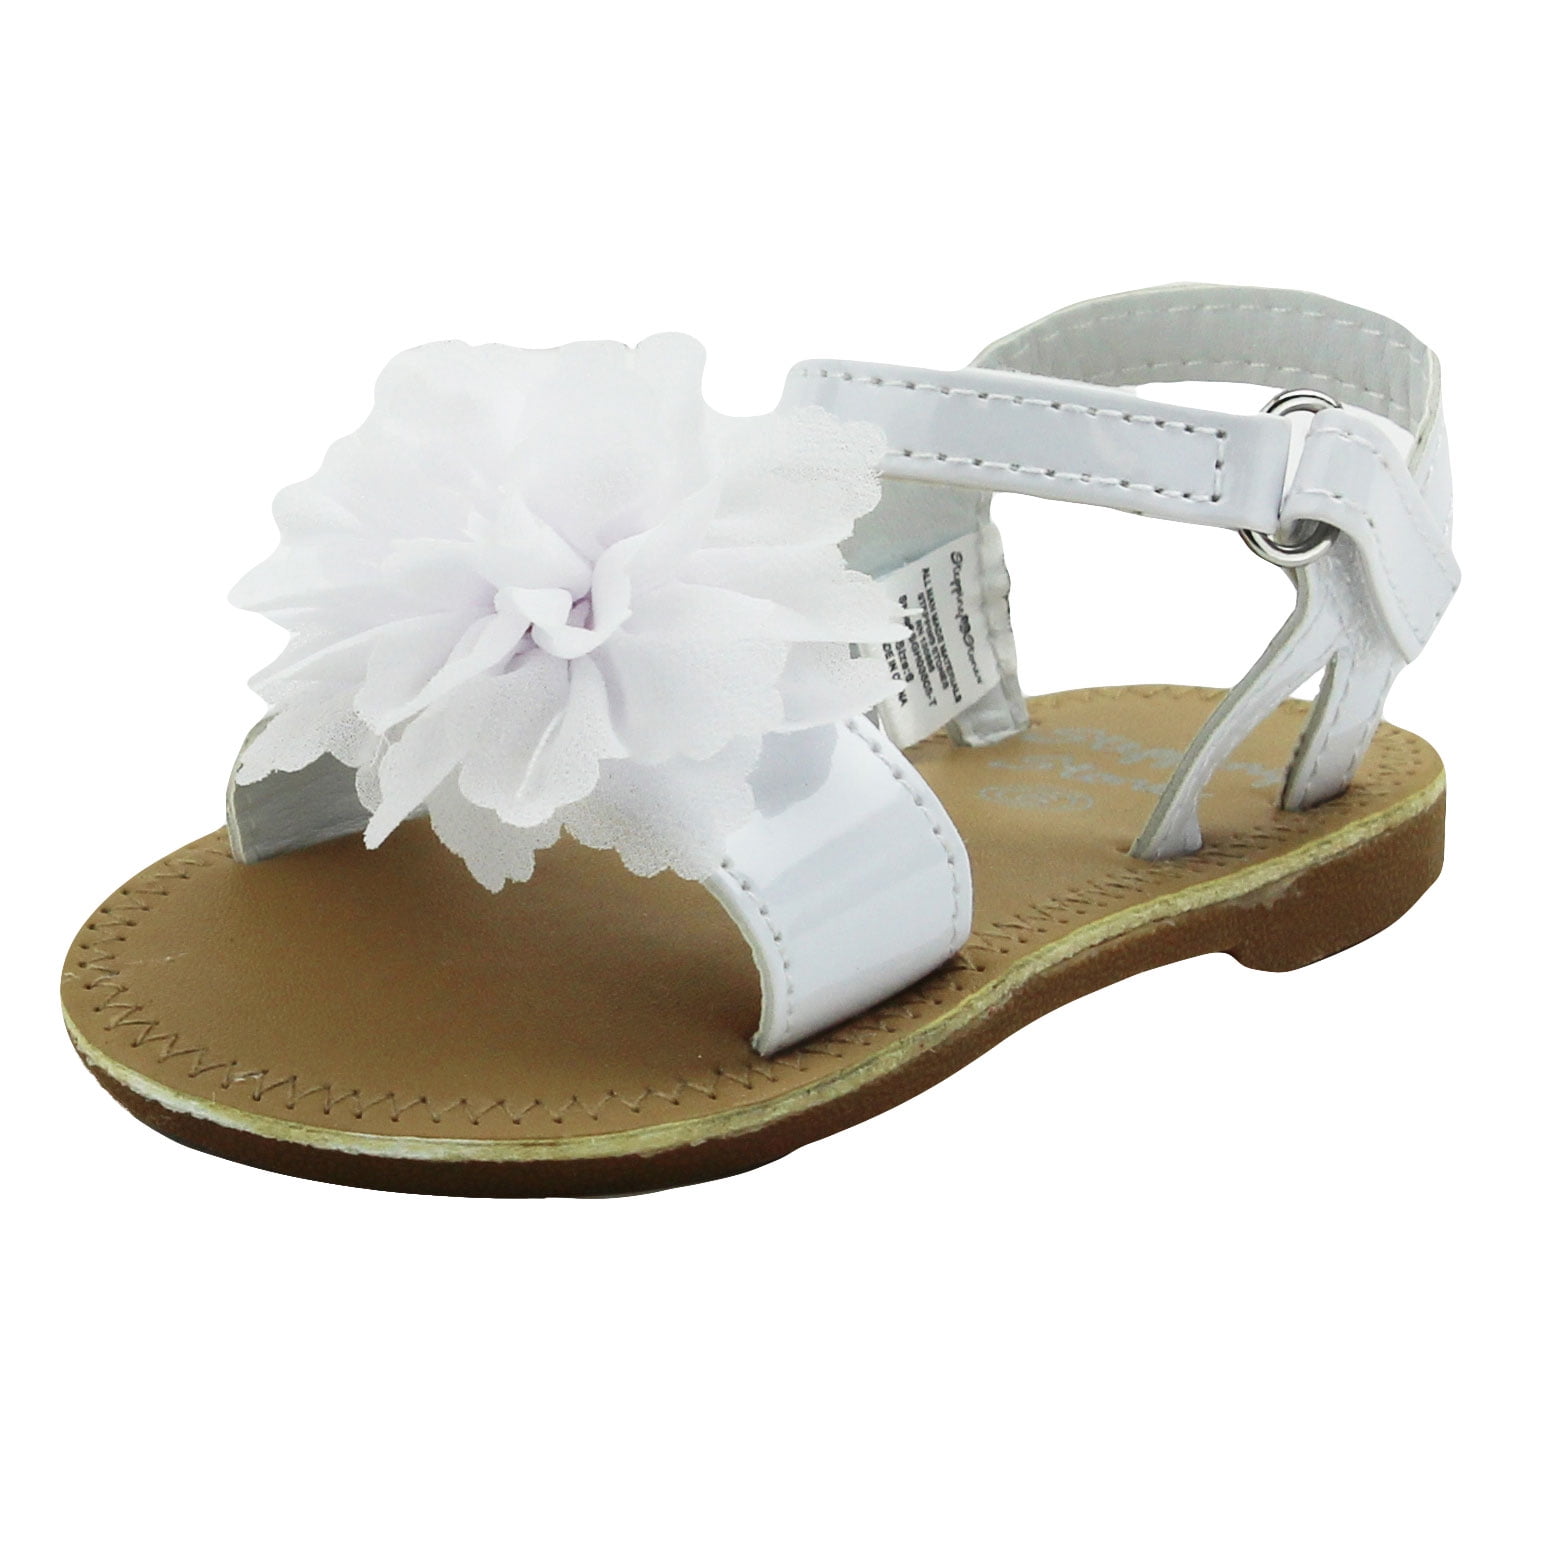 white baby sandals size 3